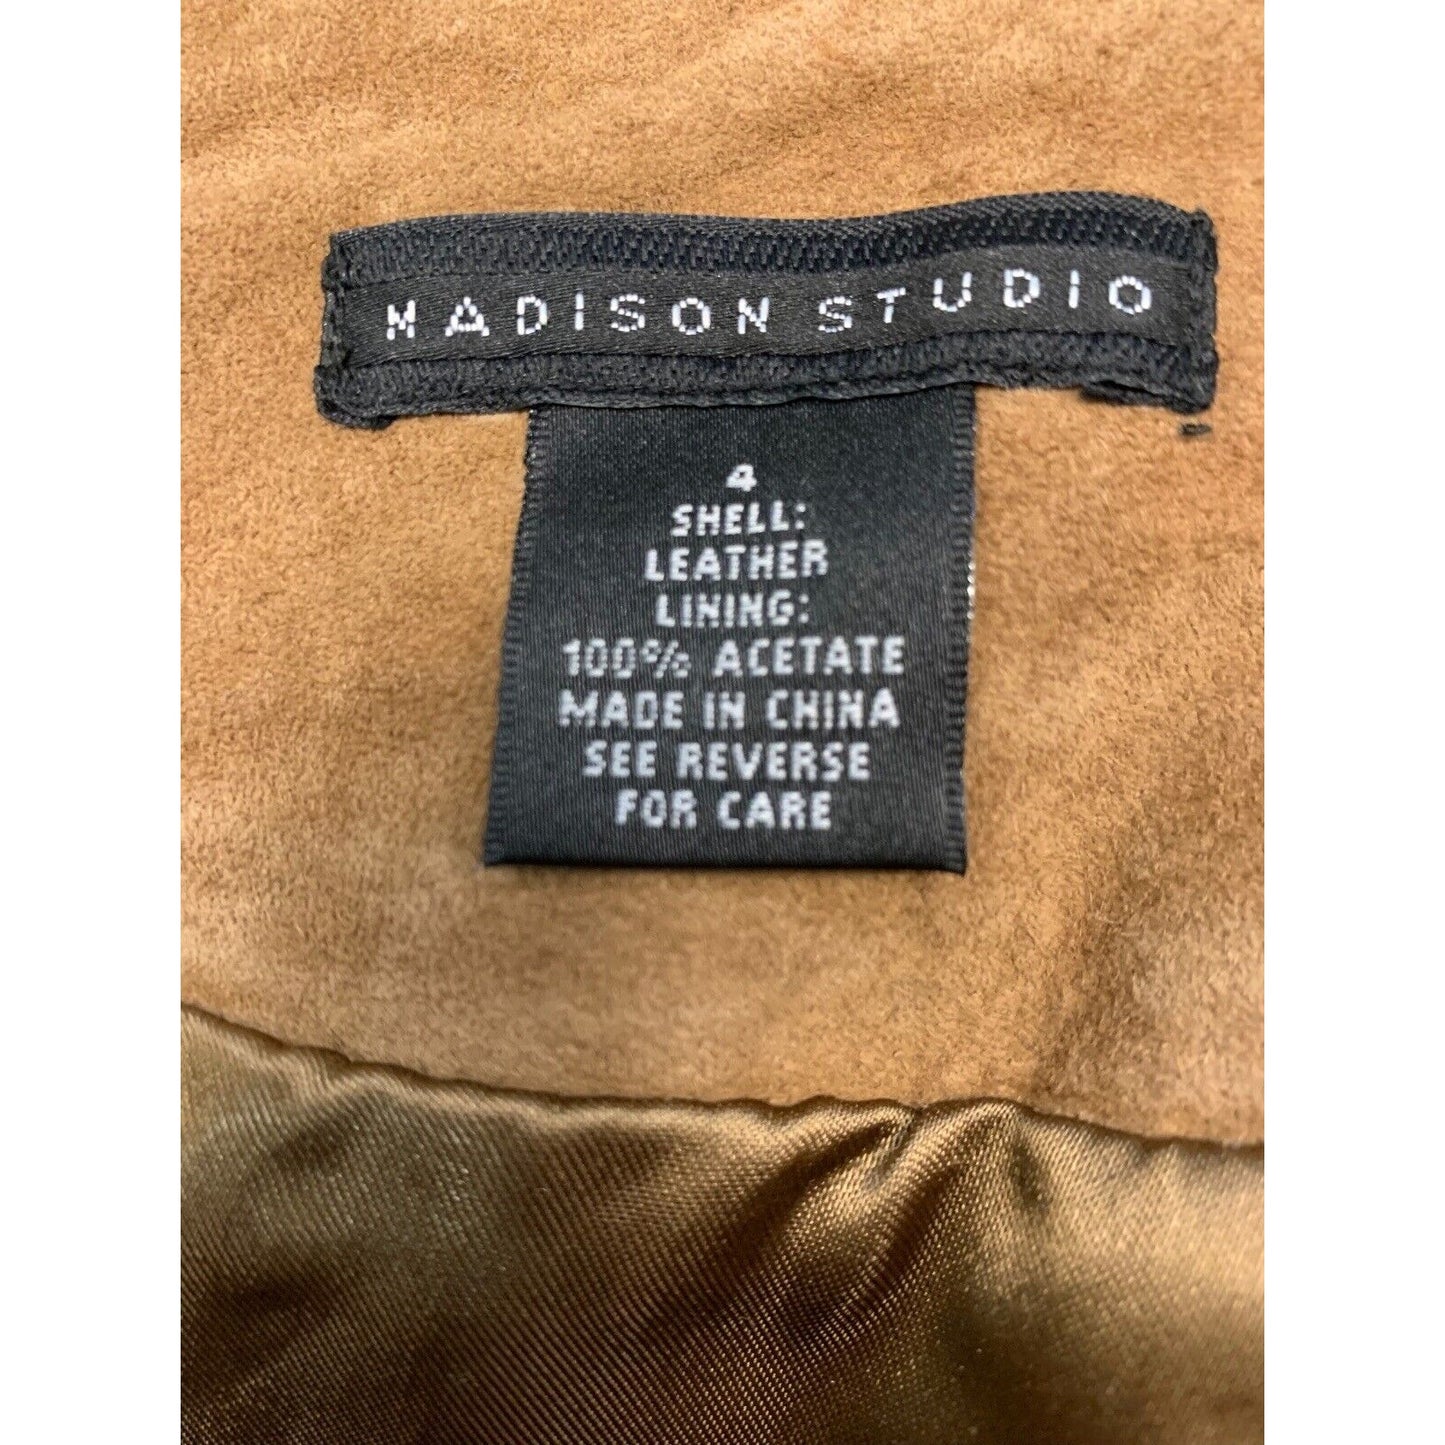 Brand Label, Size And Fabric Info Tags